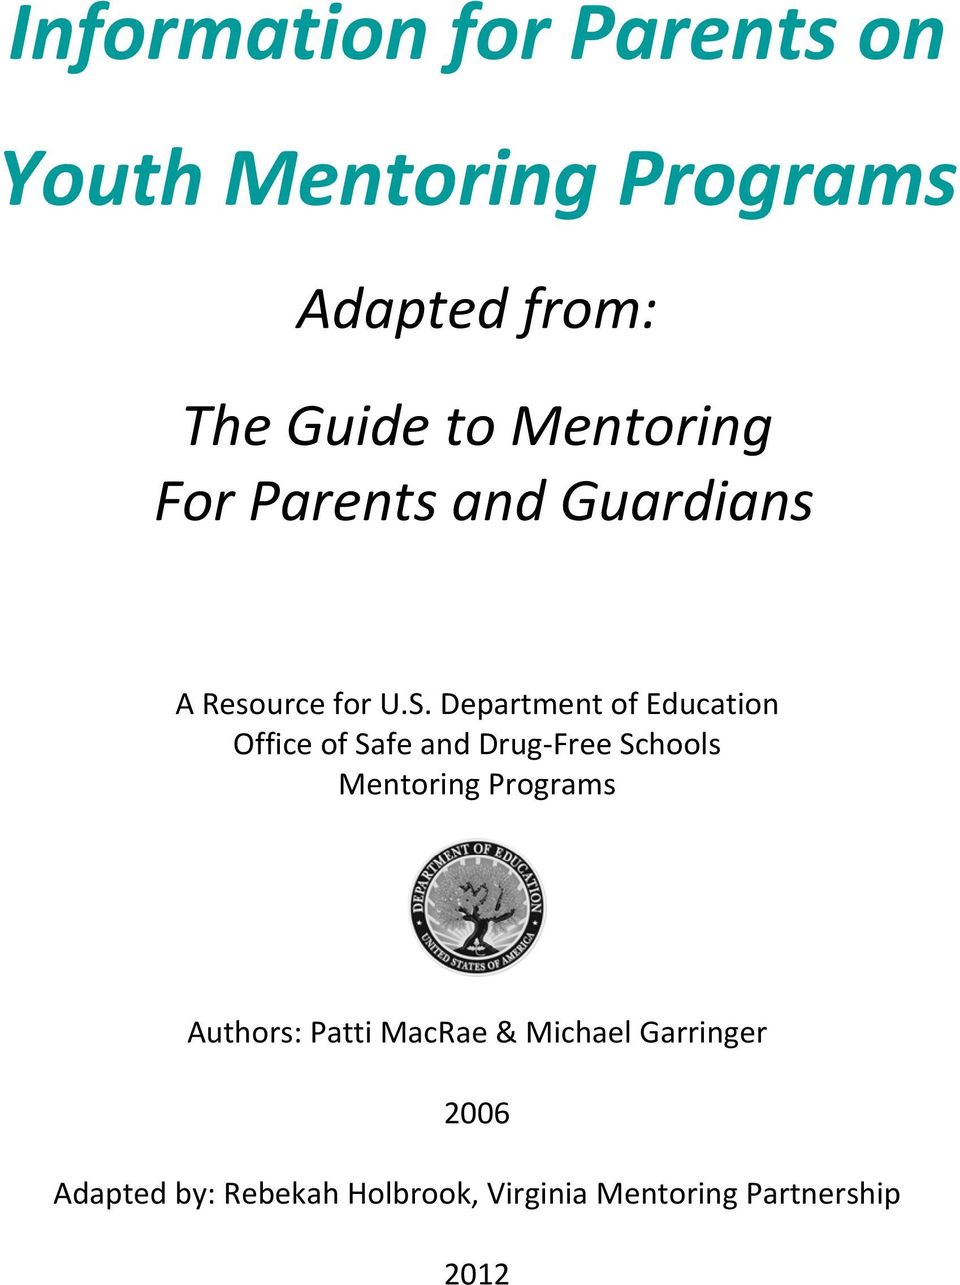 Department of Education Office of Safe and Drug Free Schools Mentoring Programs